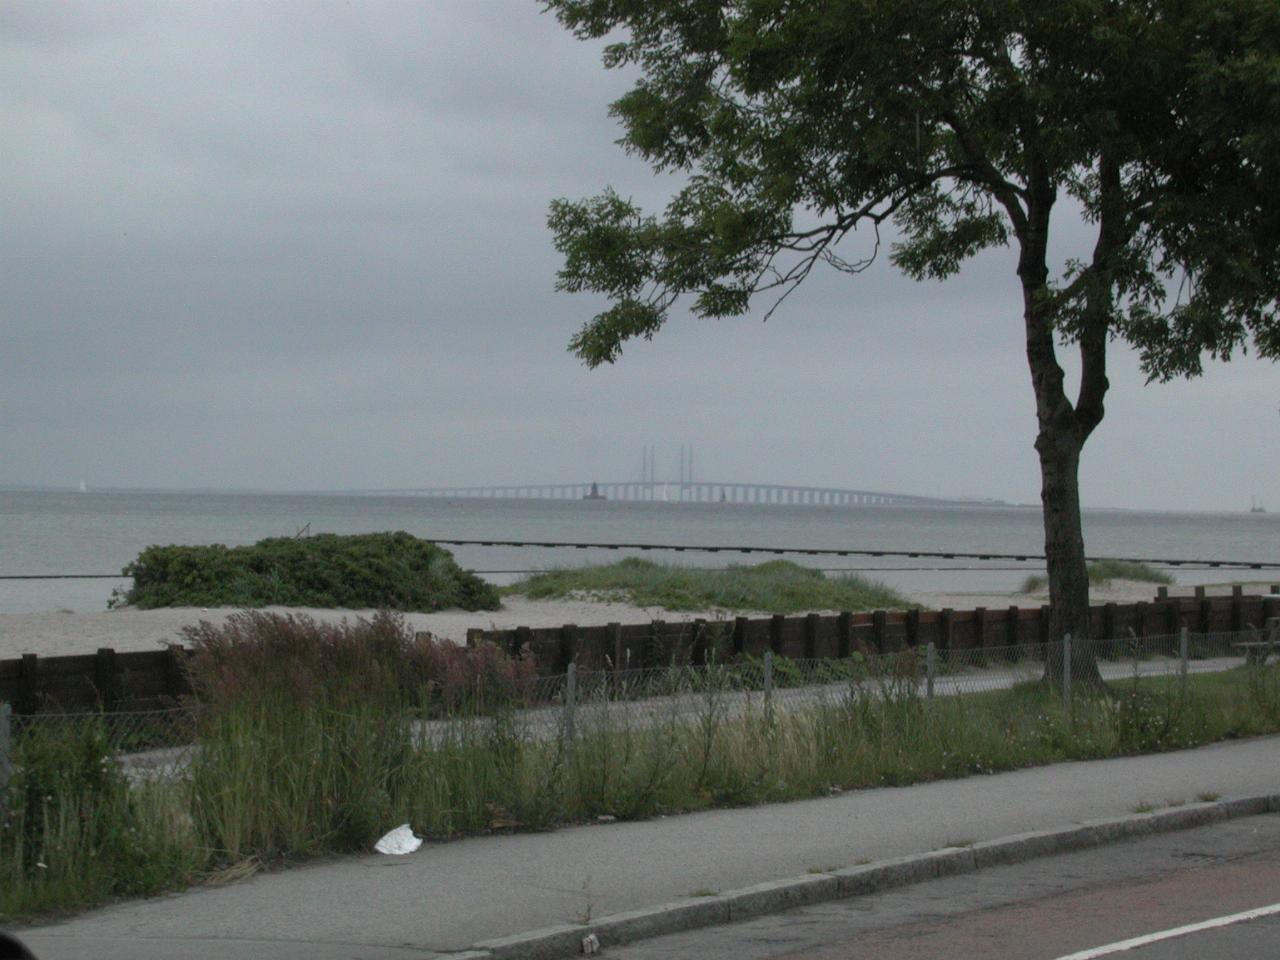 KPLU Viking Jazz: New bridge and tunnel across Øresund from Copenhagen to Malmo, Sweden, seen on way to airport for departure to Molde, Norway